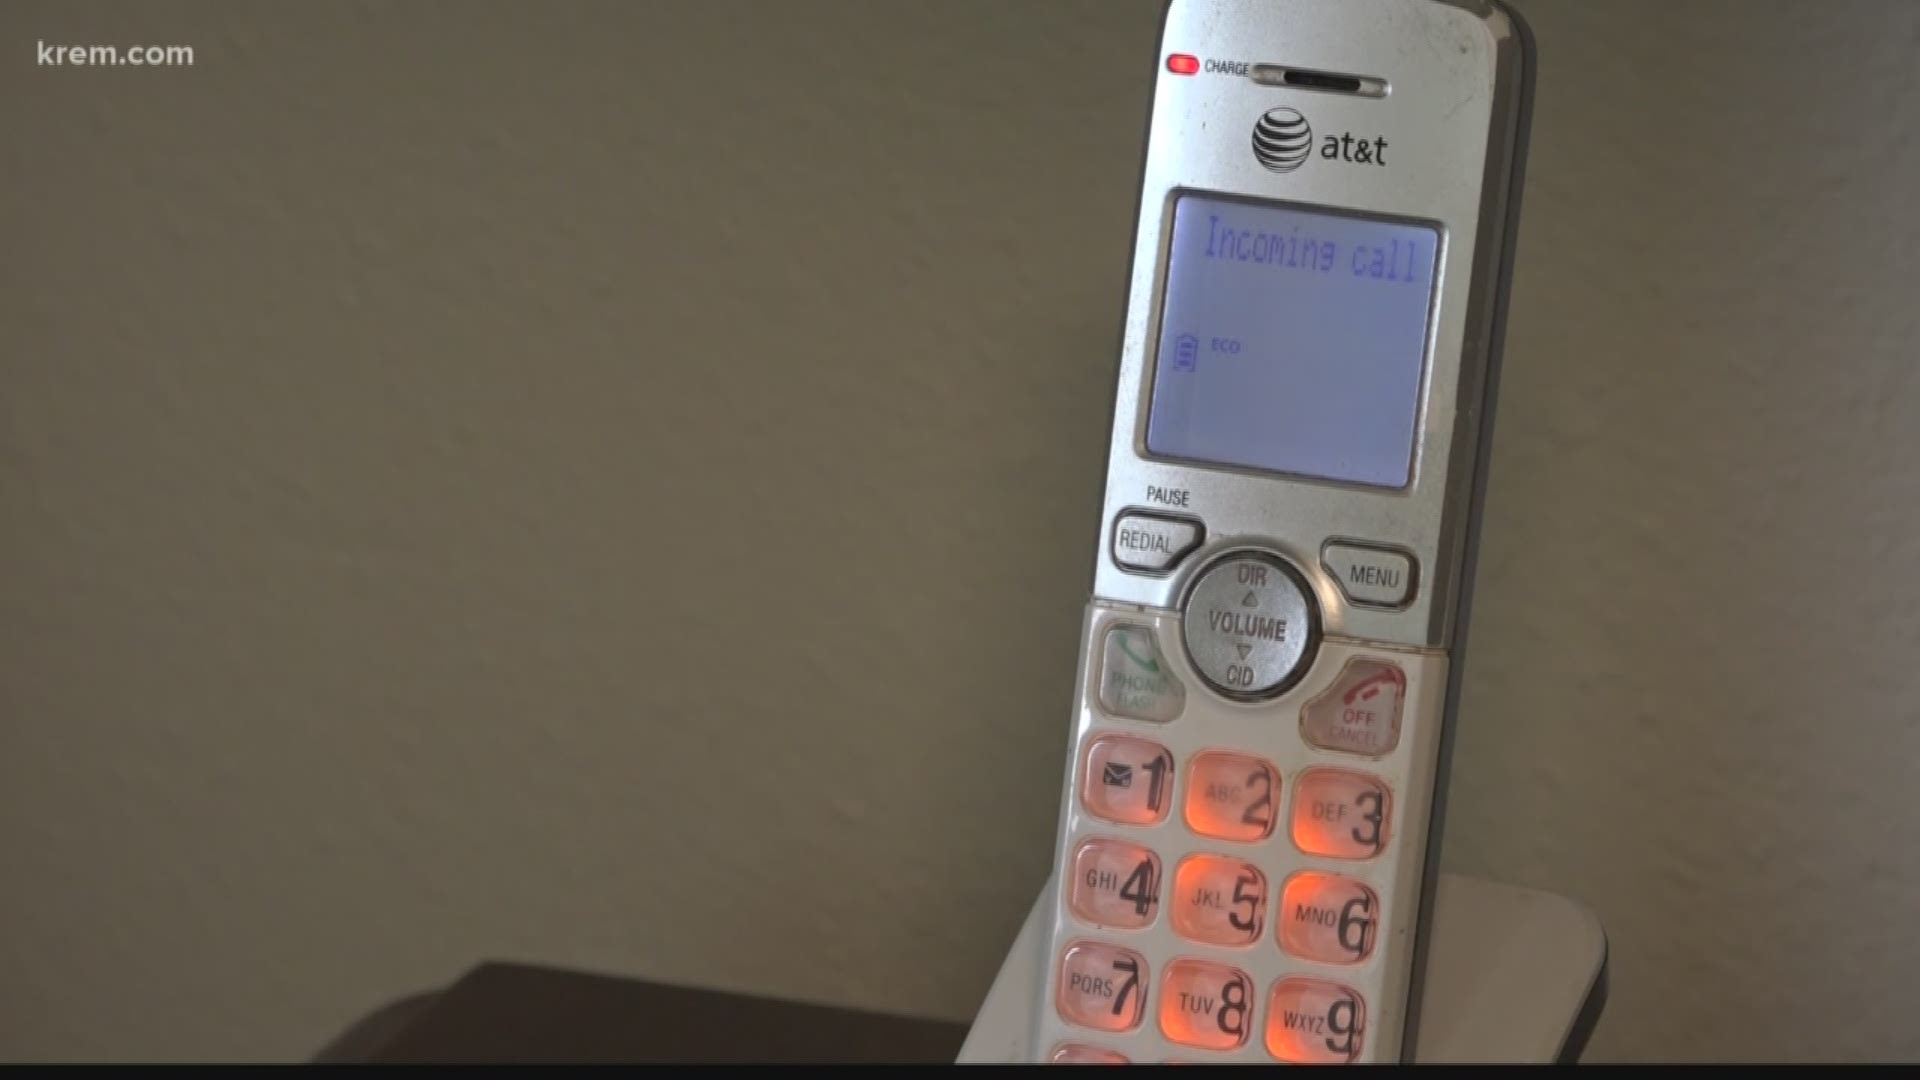 Avista said they have been receiving more scam activity since the snowfall on Oct. 9. The callers claim to be shutting down power if the customer doesn't pay $482.